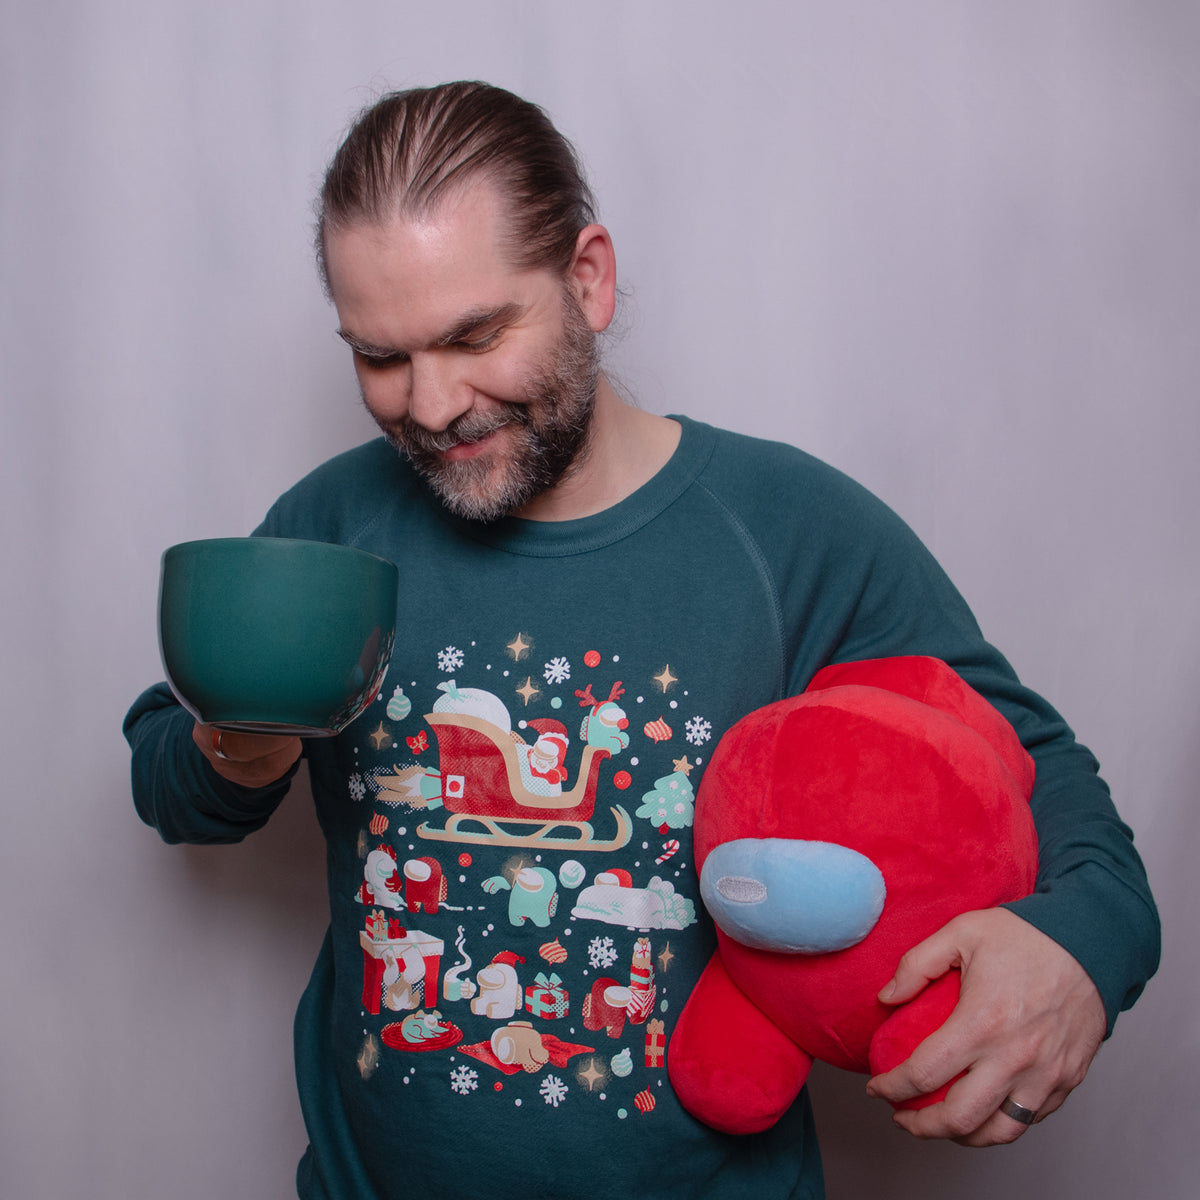 A photograph of a model wearing a green Christmas Crewmates longsleeve sweatshirt. The model is holding up a dark green mug in one hand and holding a red Crewmate plush in the other.